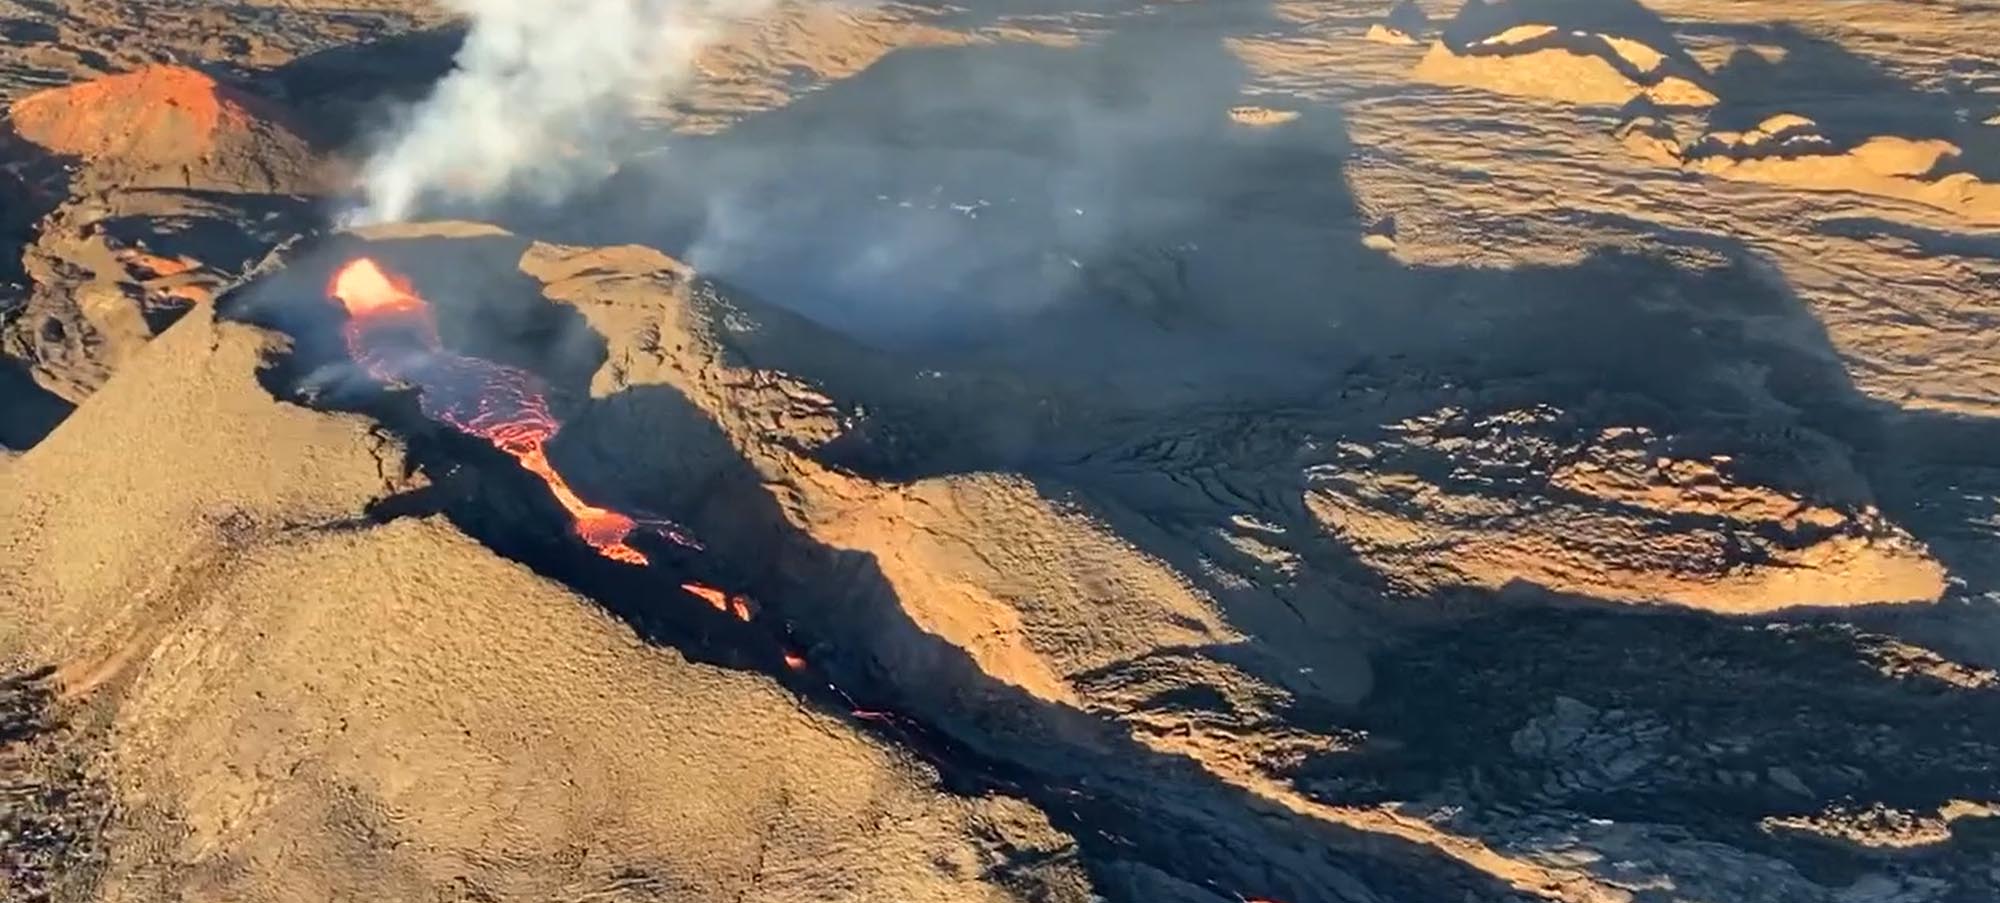 View of Mauna Loa from above showing lava